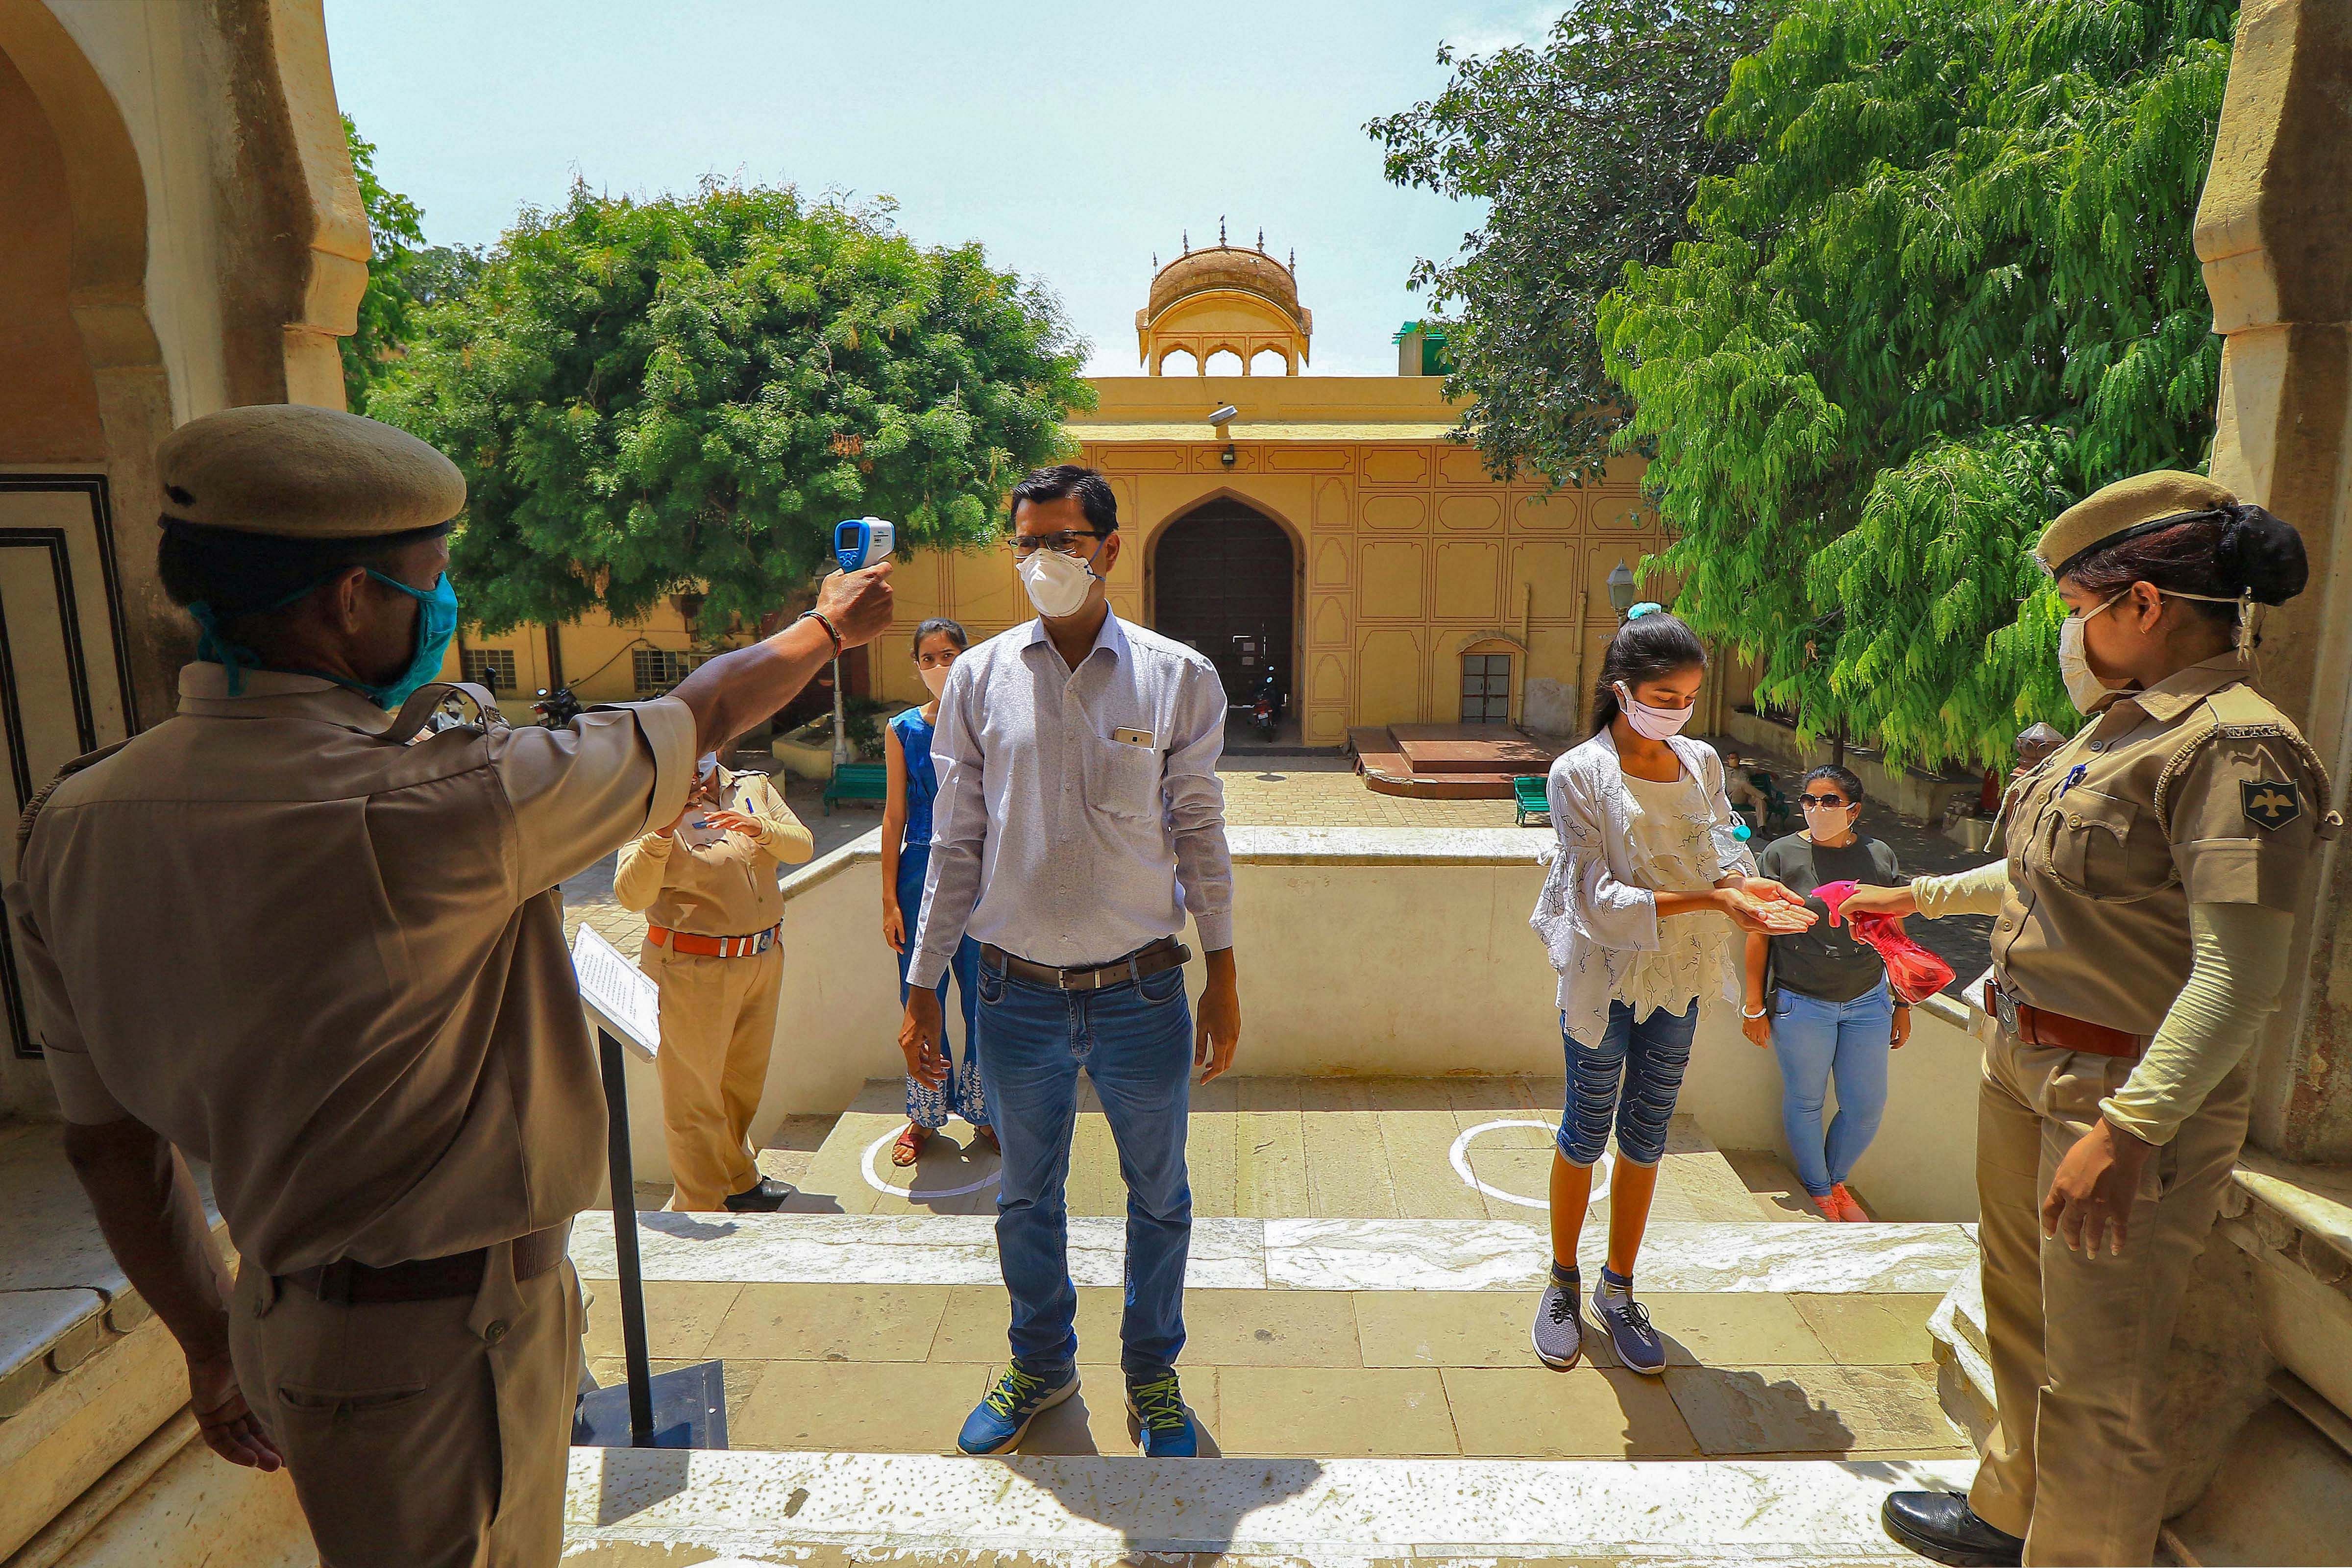 Tourists undergo thermal screening at Hawa Mahal after the authorities permitted to open monuments, forts and museums in the state, during the ongoing COVID-19 lockdown. (PTI Photo)